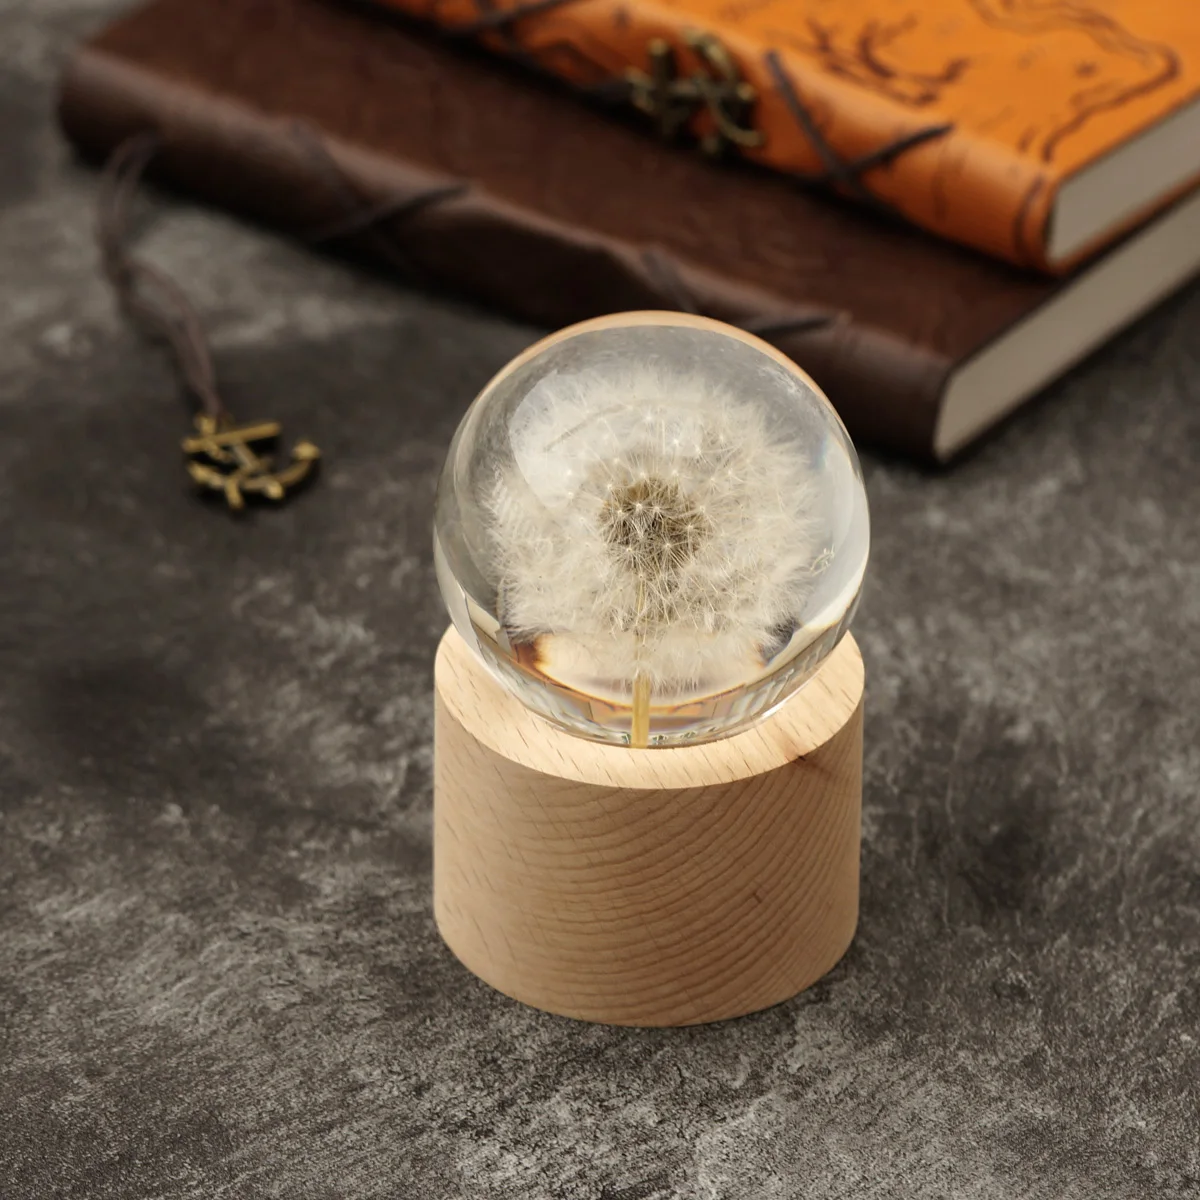 

Real Dandelion Crystal Ball Glass Resin Ball Home Decorating Dried Flowers Small Ornament Natural Plants Specimen Gift